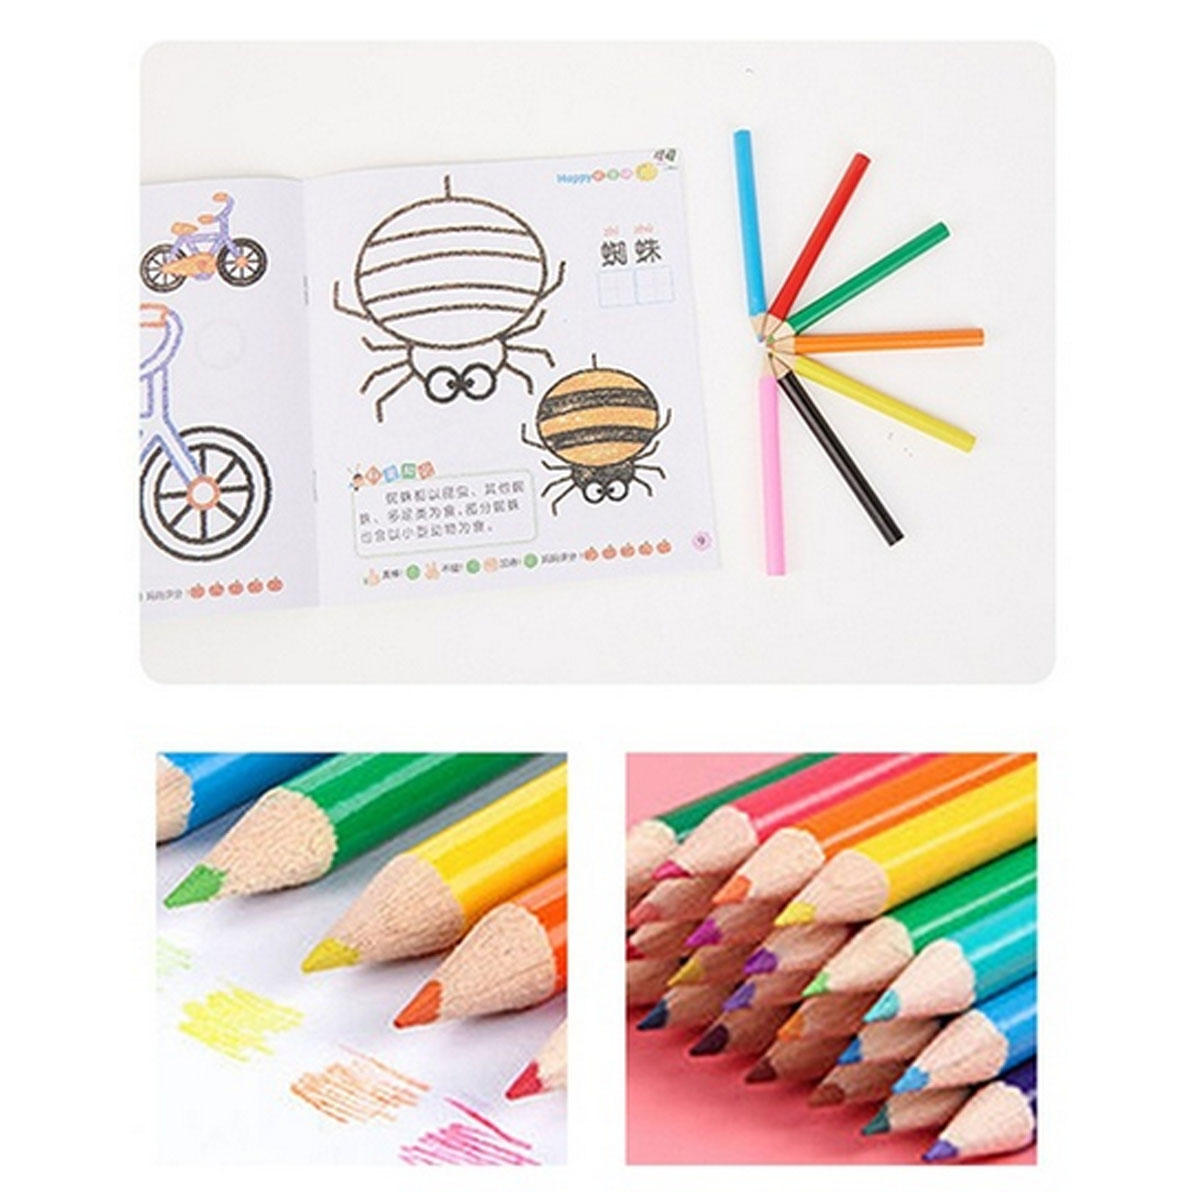 150Pcs Children Drawing WaterColor Pen Kids Art Set Crayon Oil Pastel Painting Tool Art supplies stationery Kit for Student Gift—4